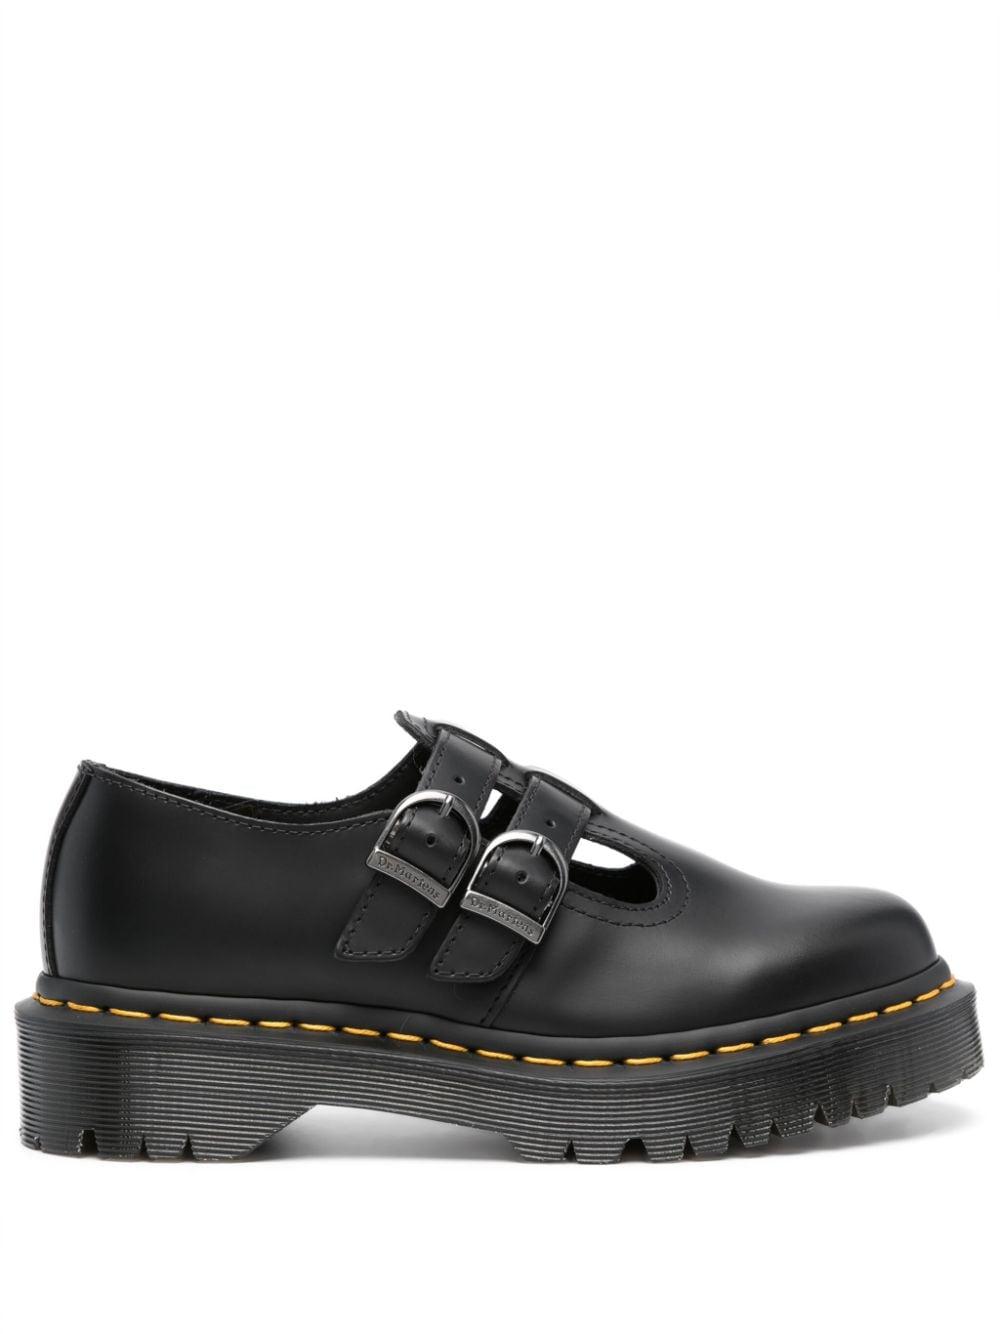 Dr. Martens 8065 Ii Bex Mary-jane Shoes in Black | Lyst